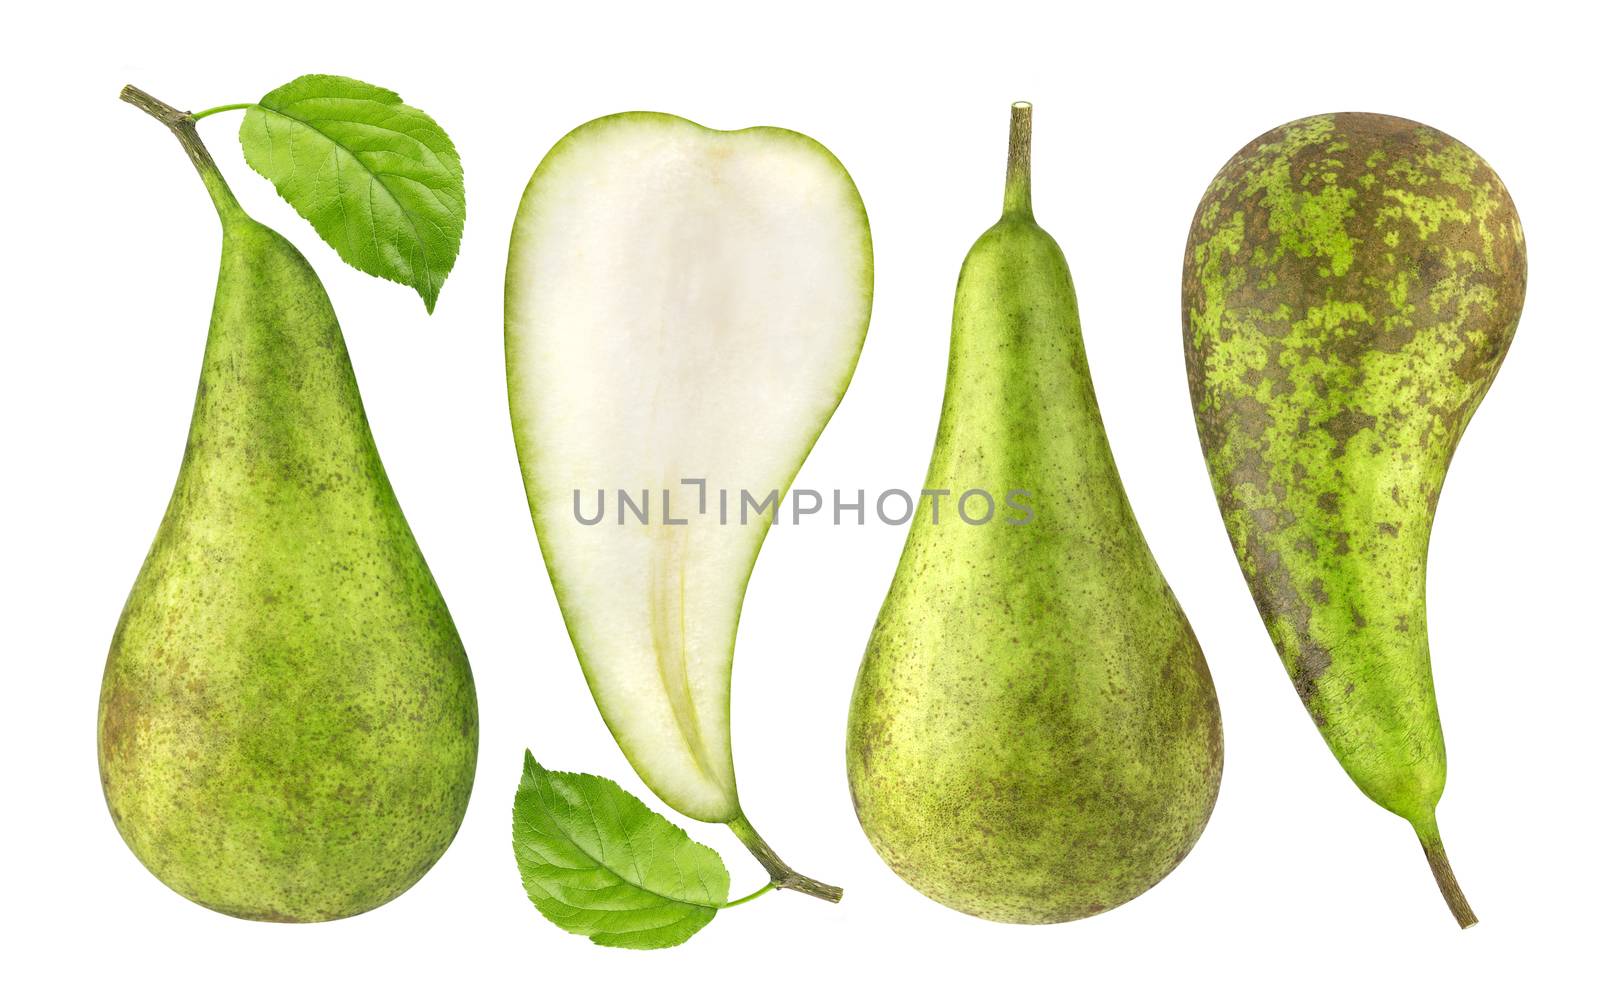 Pear isolated. Green conference pears isolated on white background. With clipping path. Collection.